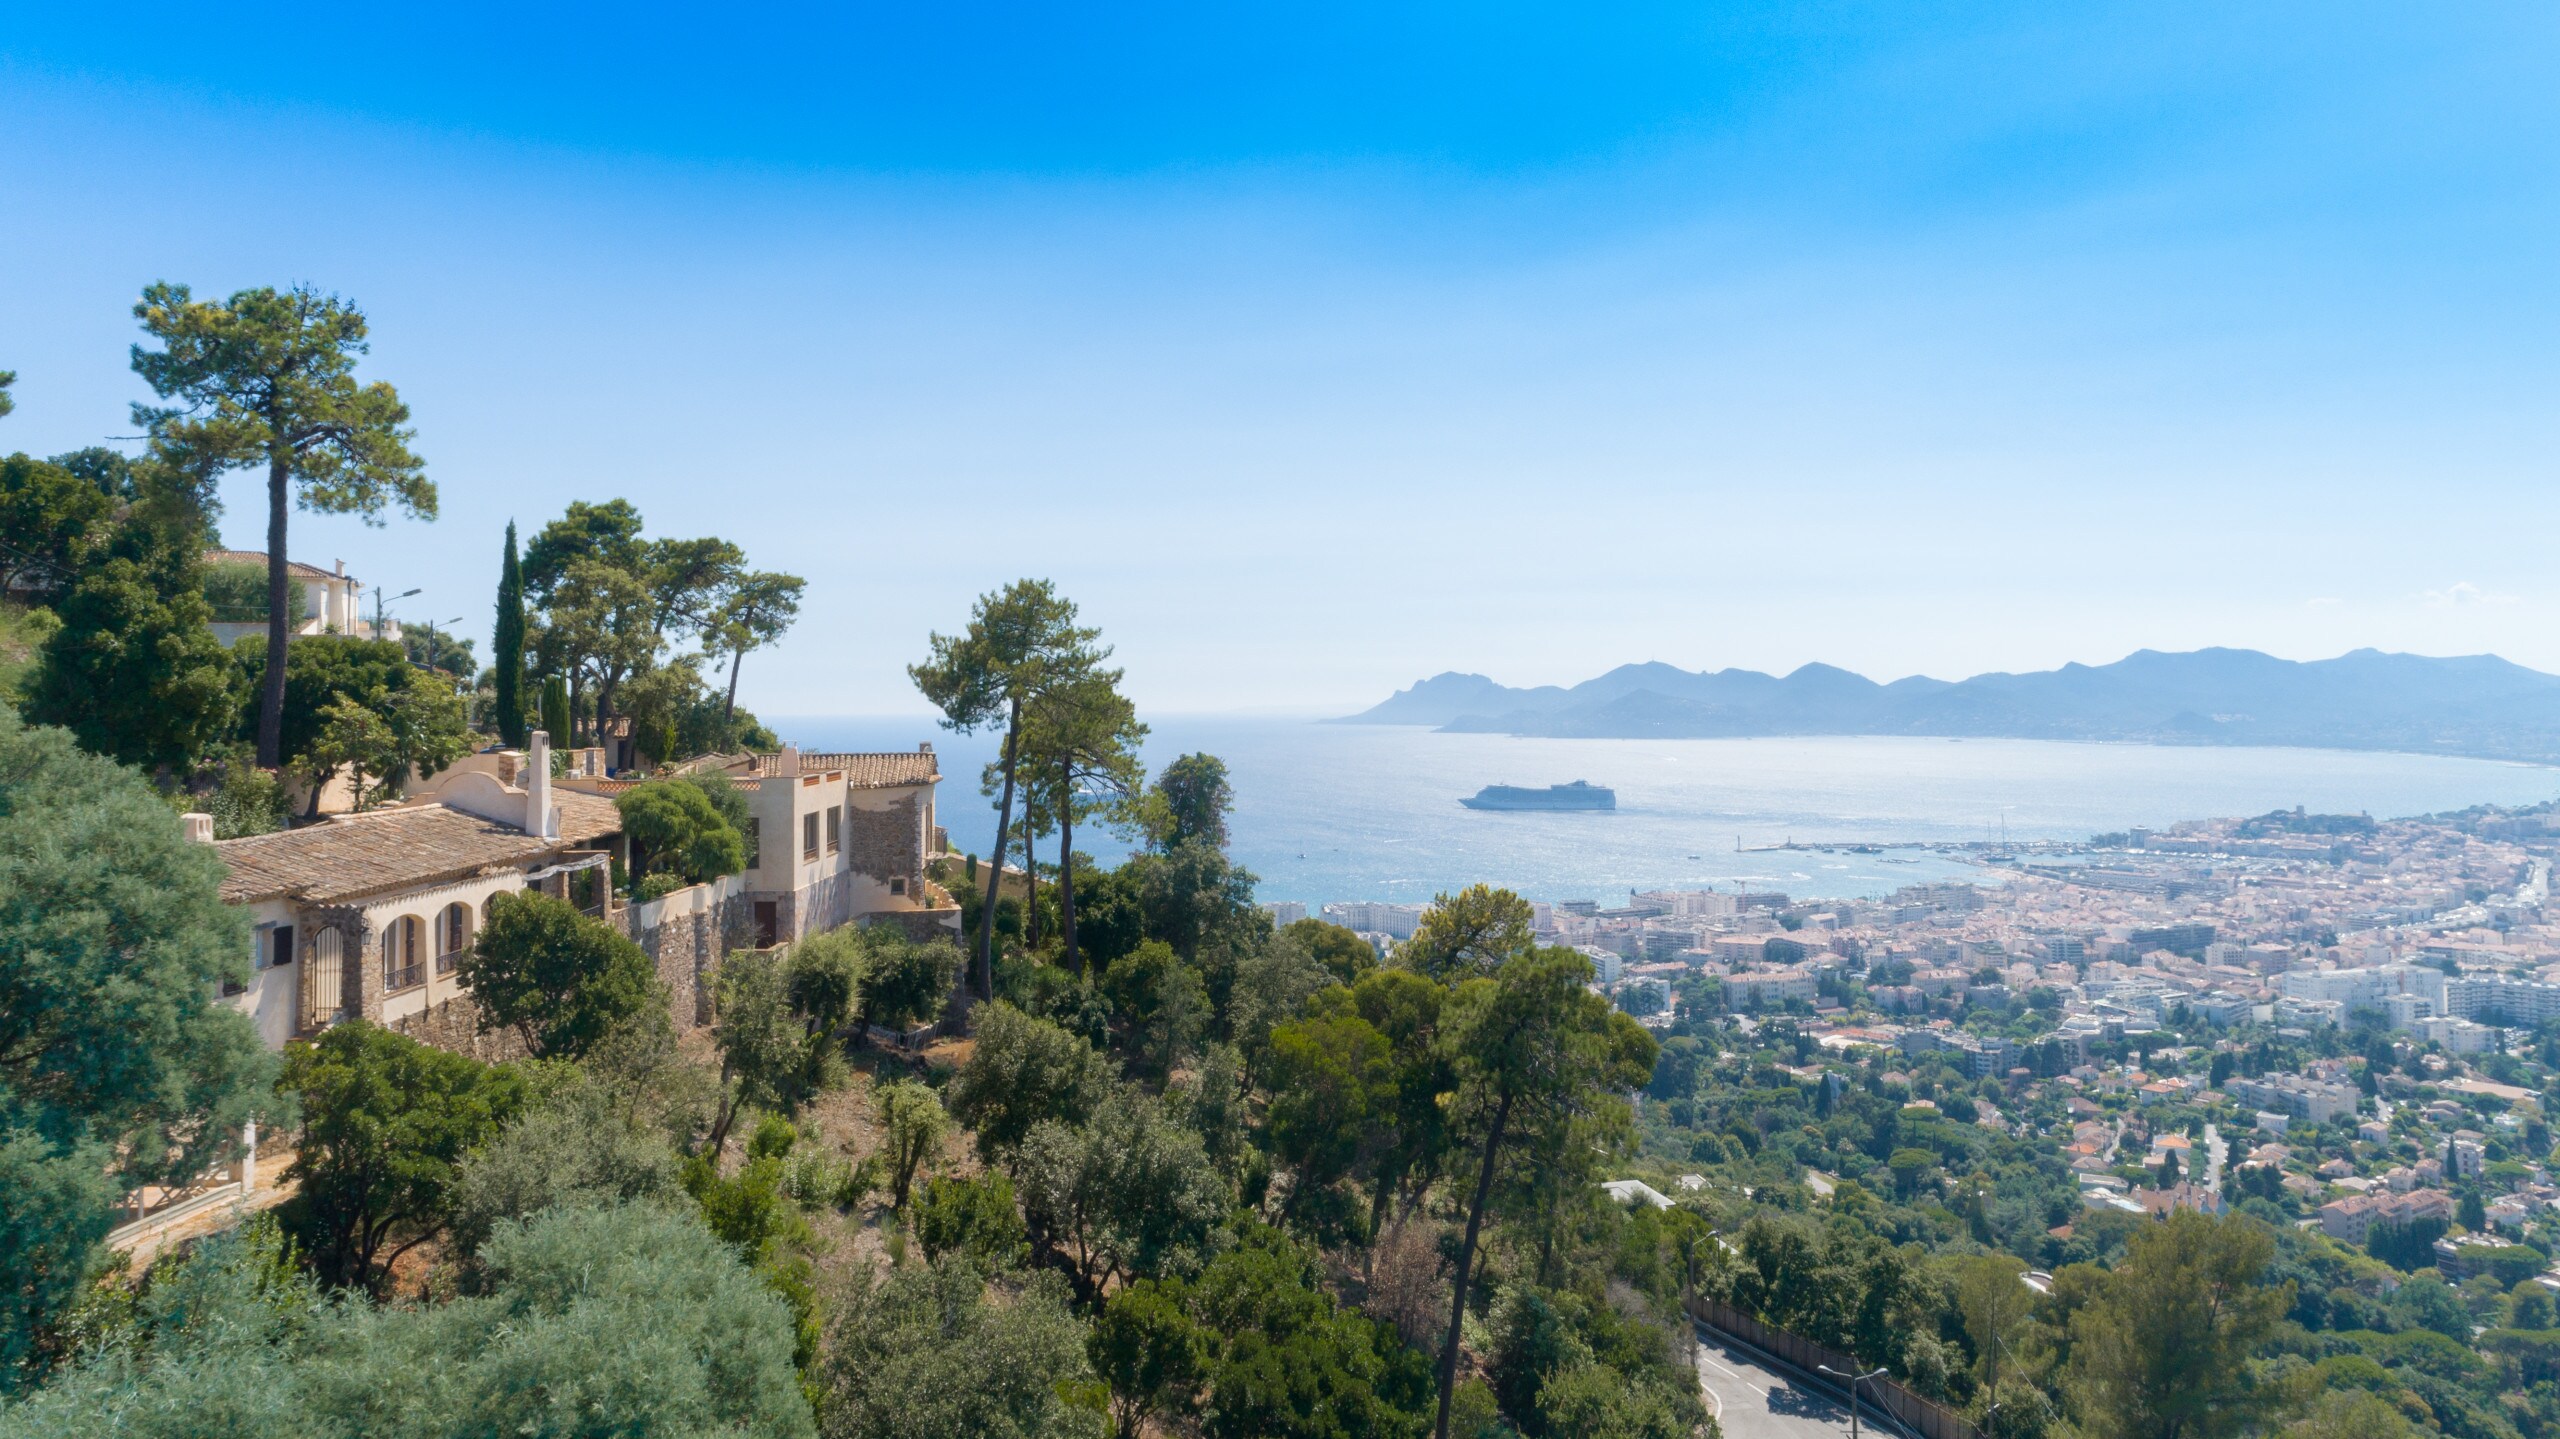 Property Image 1 - Characterful hilltop villa with breathtaking views over the Bay of Cannes